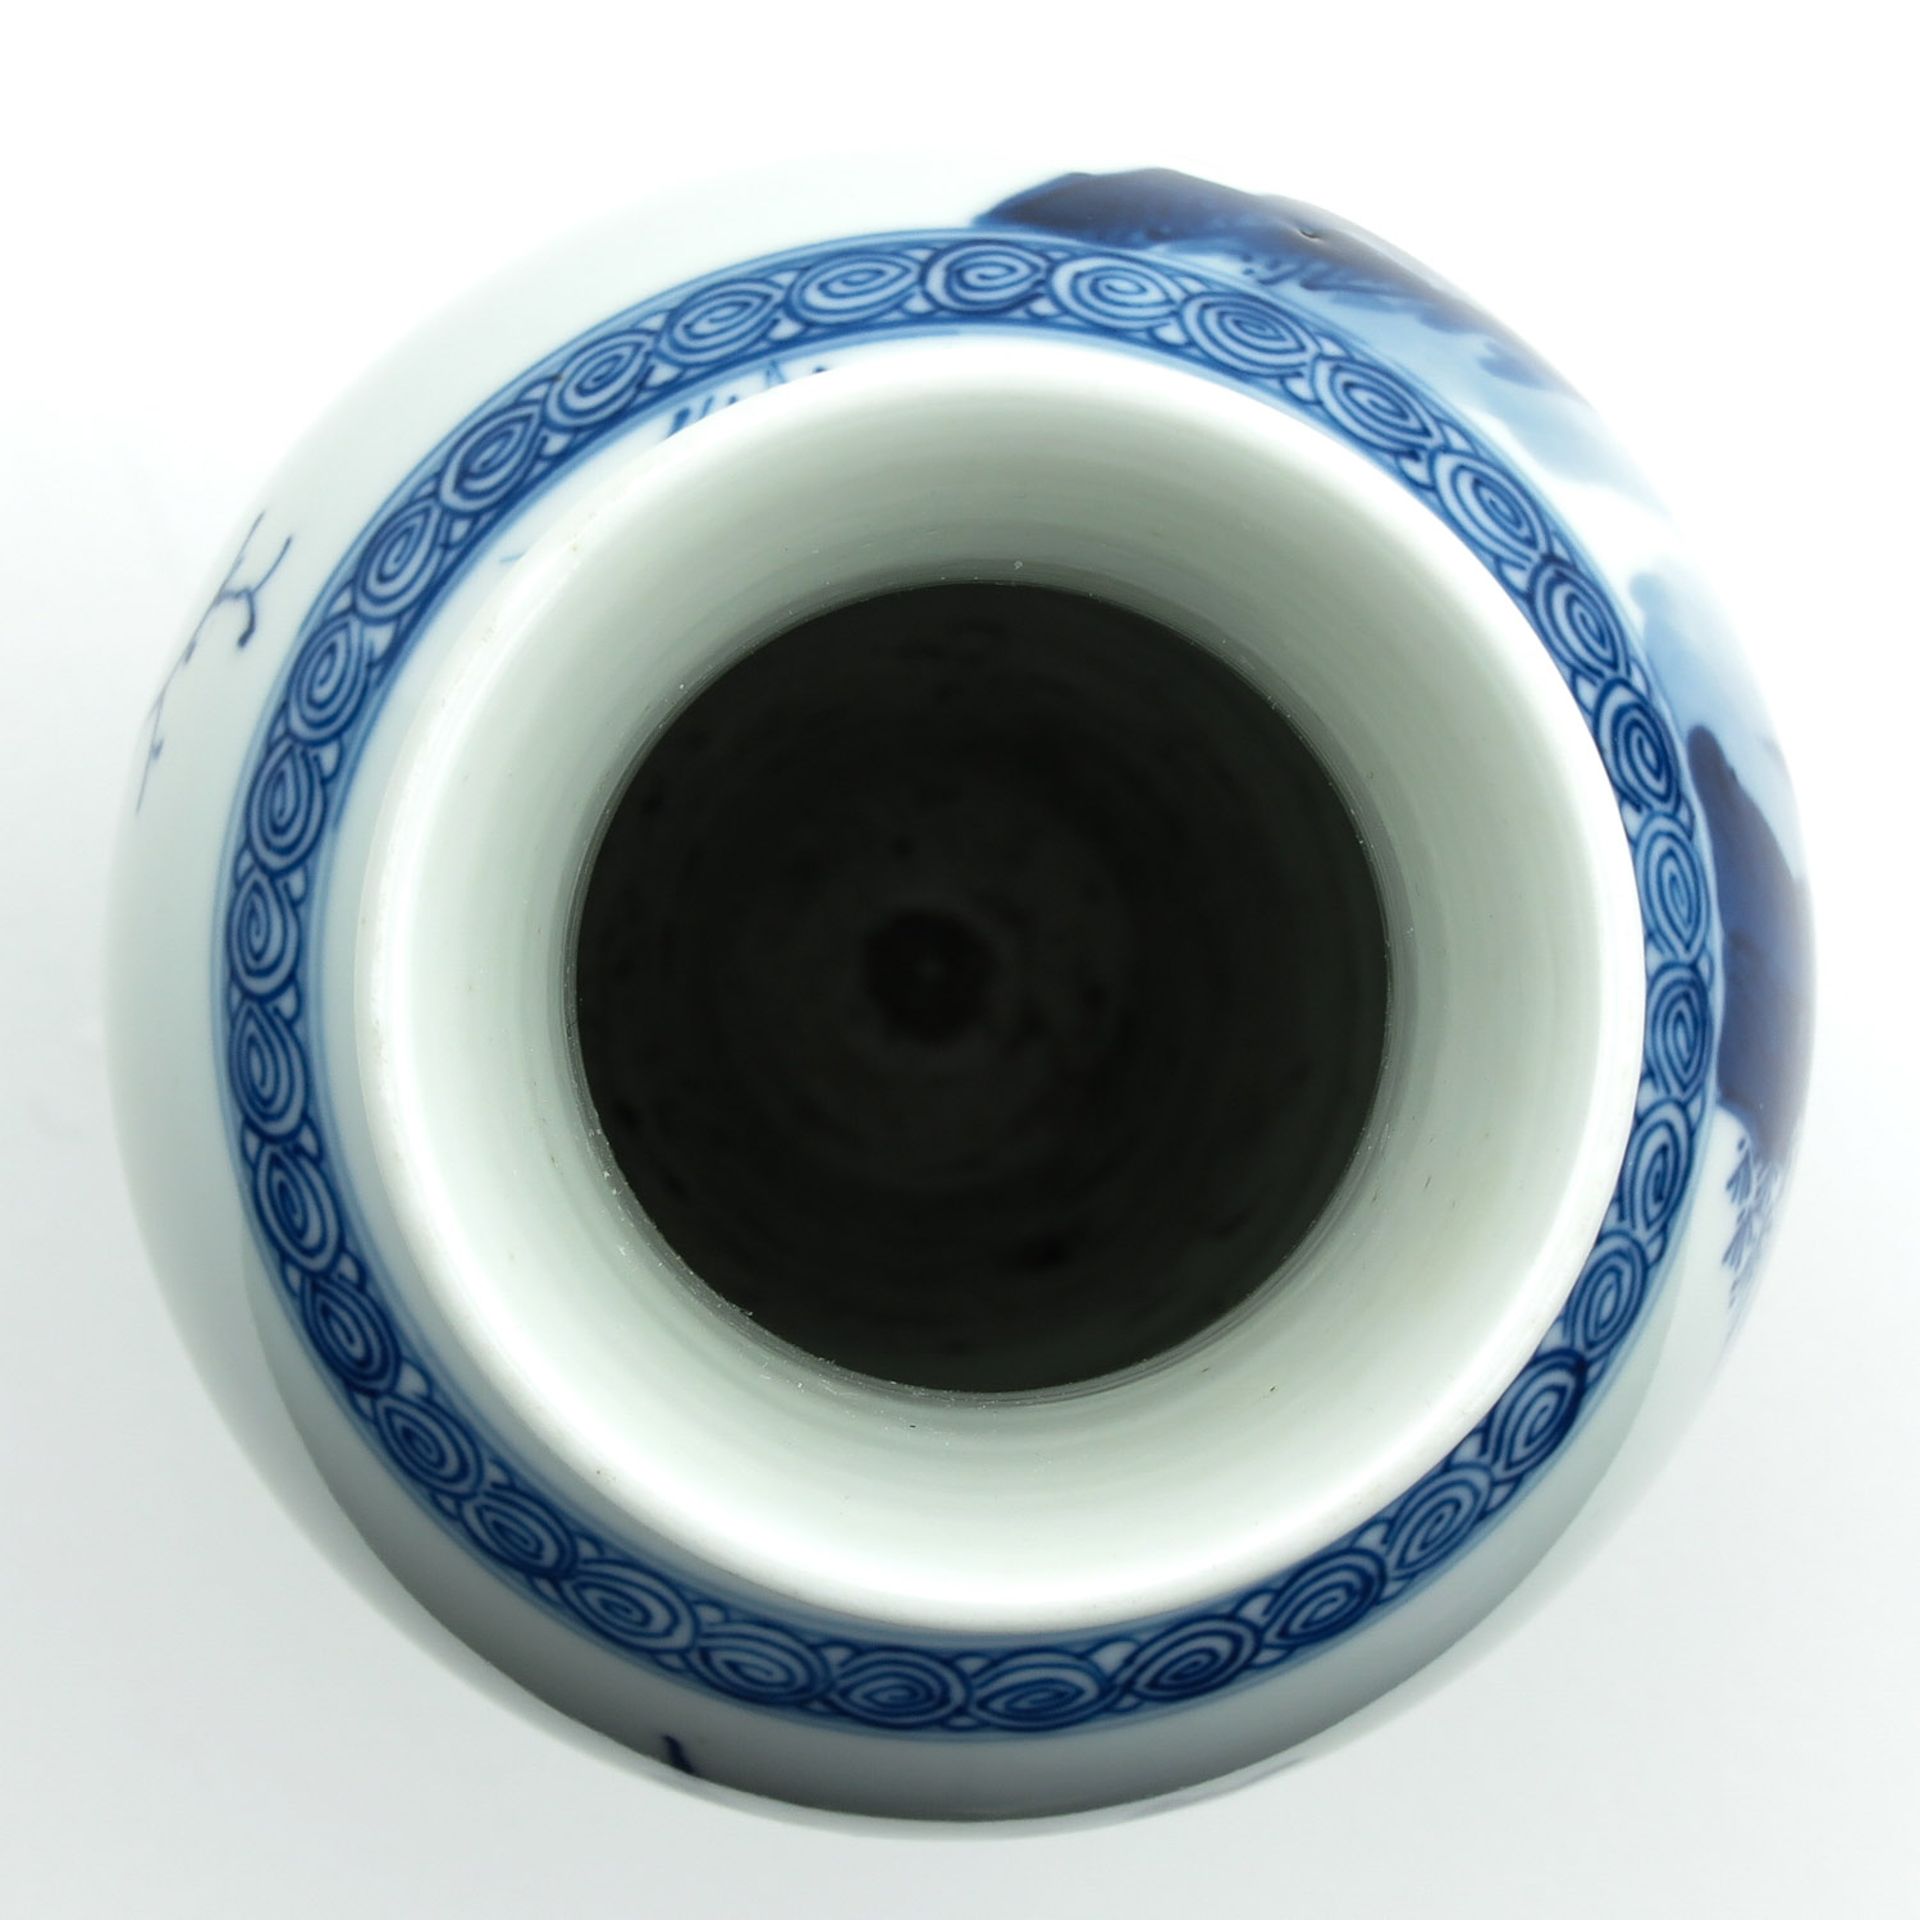 A Blue and White Vase - Image 5 of 9